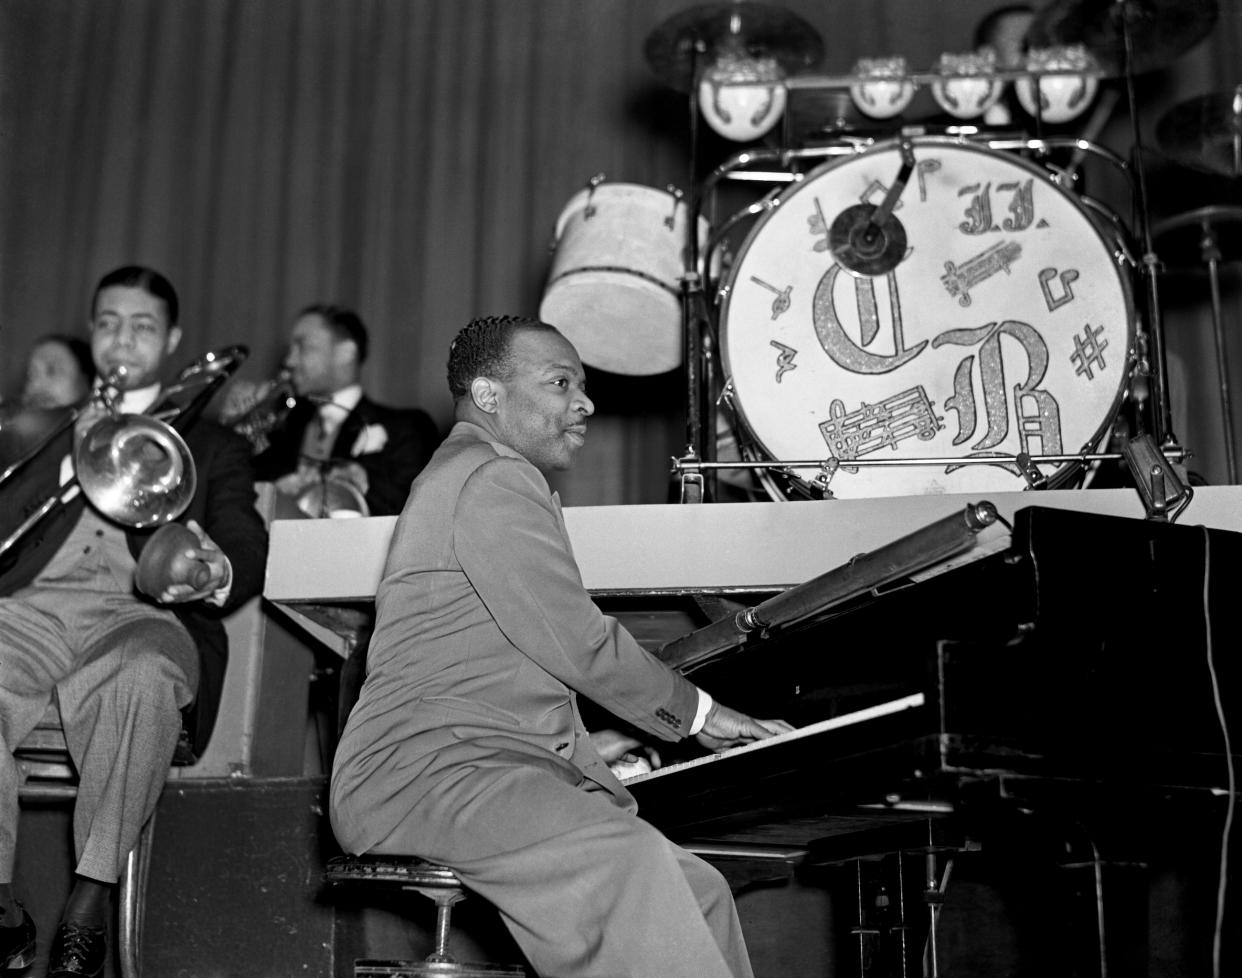 Count Basie and his orchestra has a one week engagement at the Apollo Theater, on 125th Street, New York, NY. Image dated: January 31, 1939, New York, NY. <span class="copyright">CBS Photo Archive / Getty Images</span>